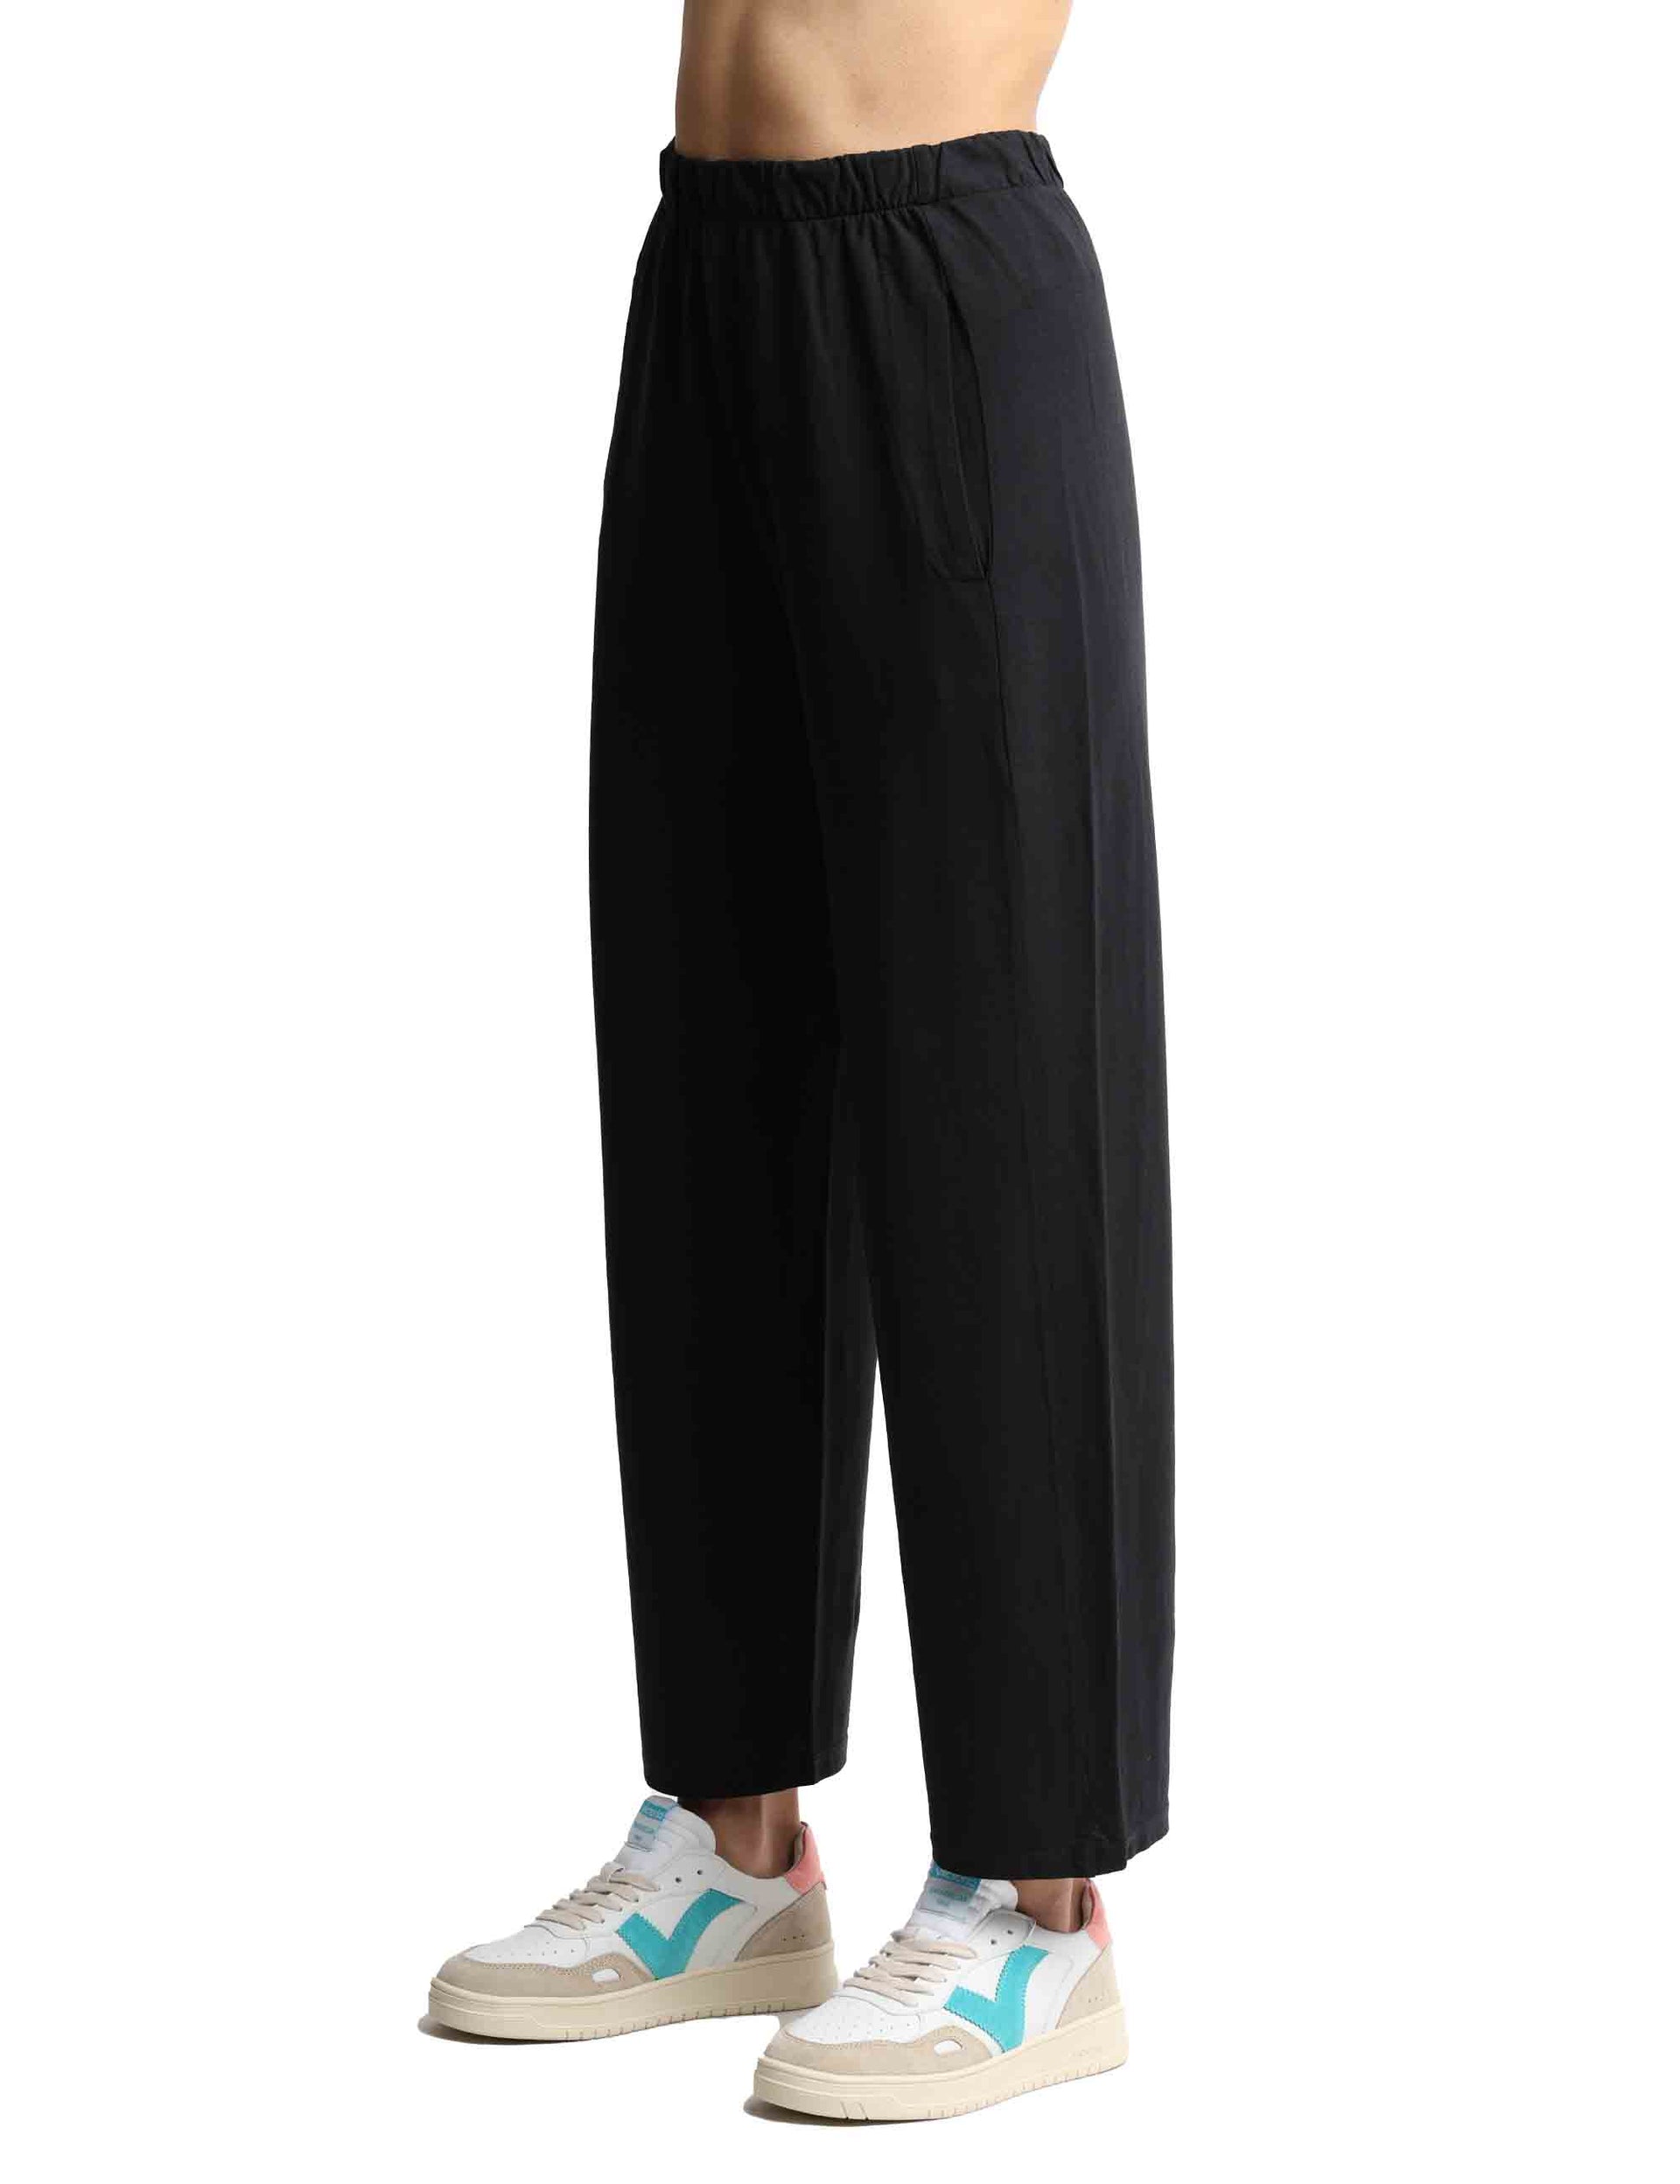 Women's real cotton trousers with elastic waist and French pockets